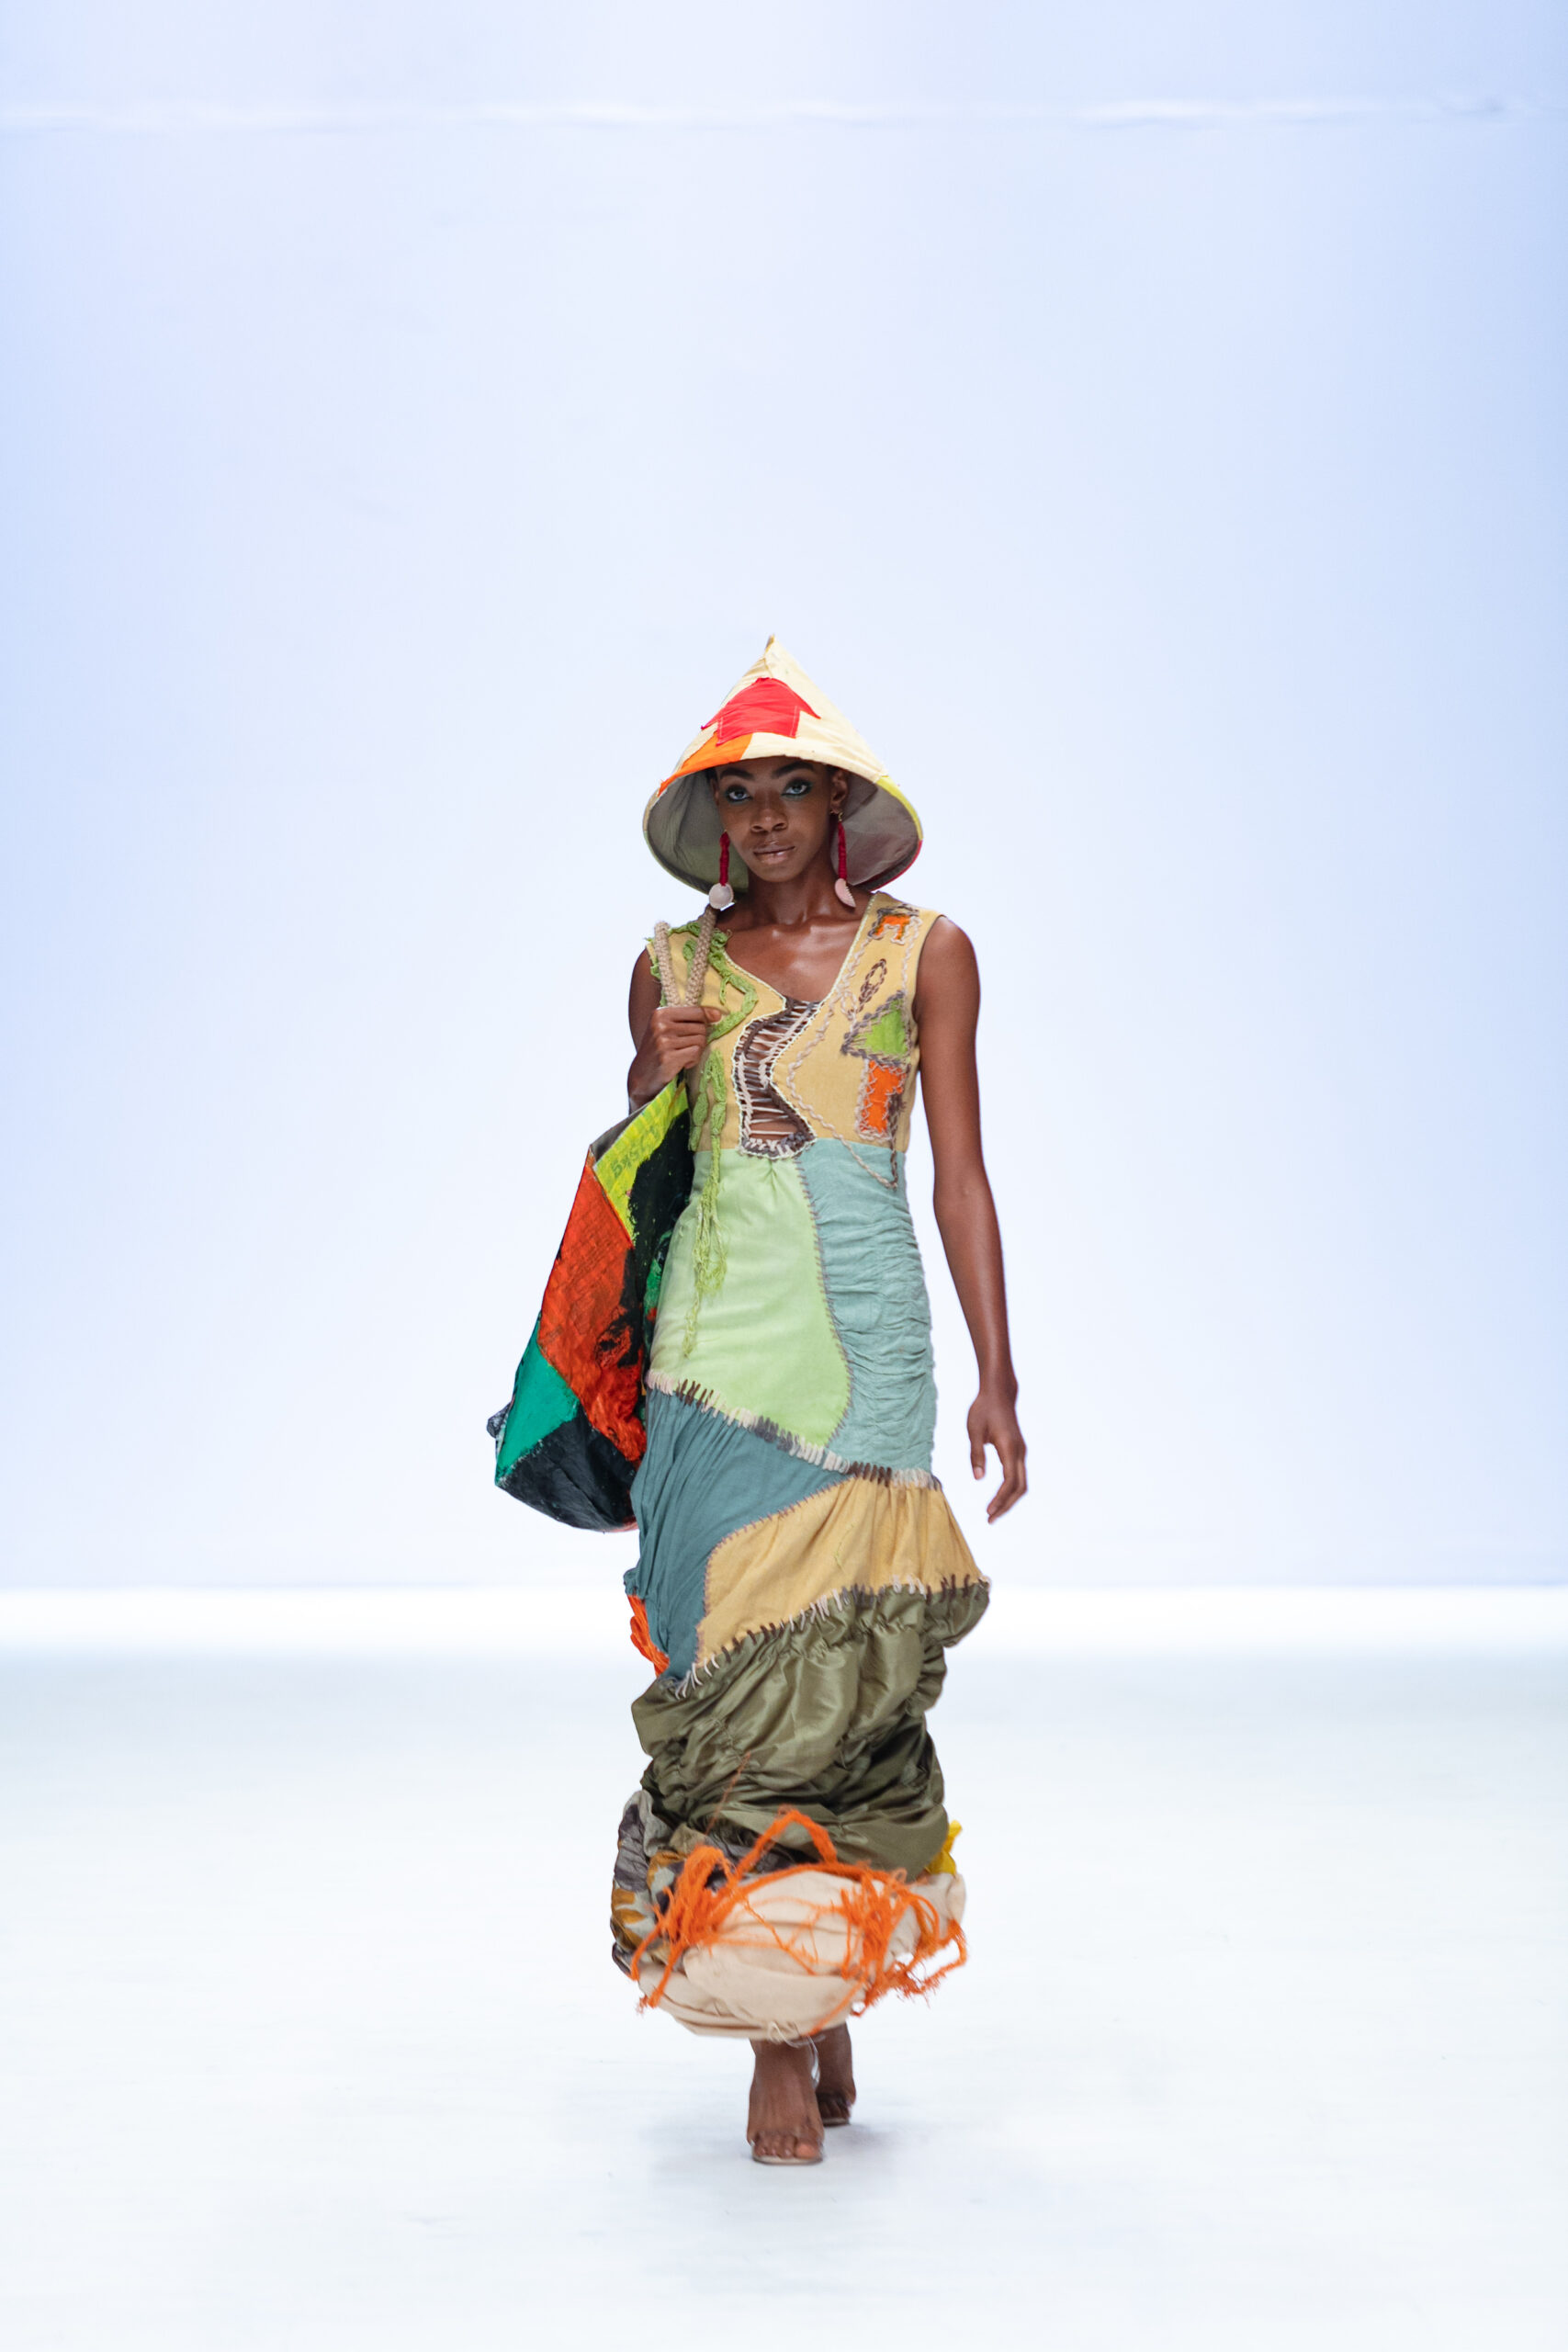 Look one from LFW's green access 2022 finalist - Pettre Taylor